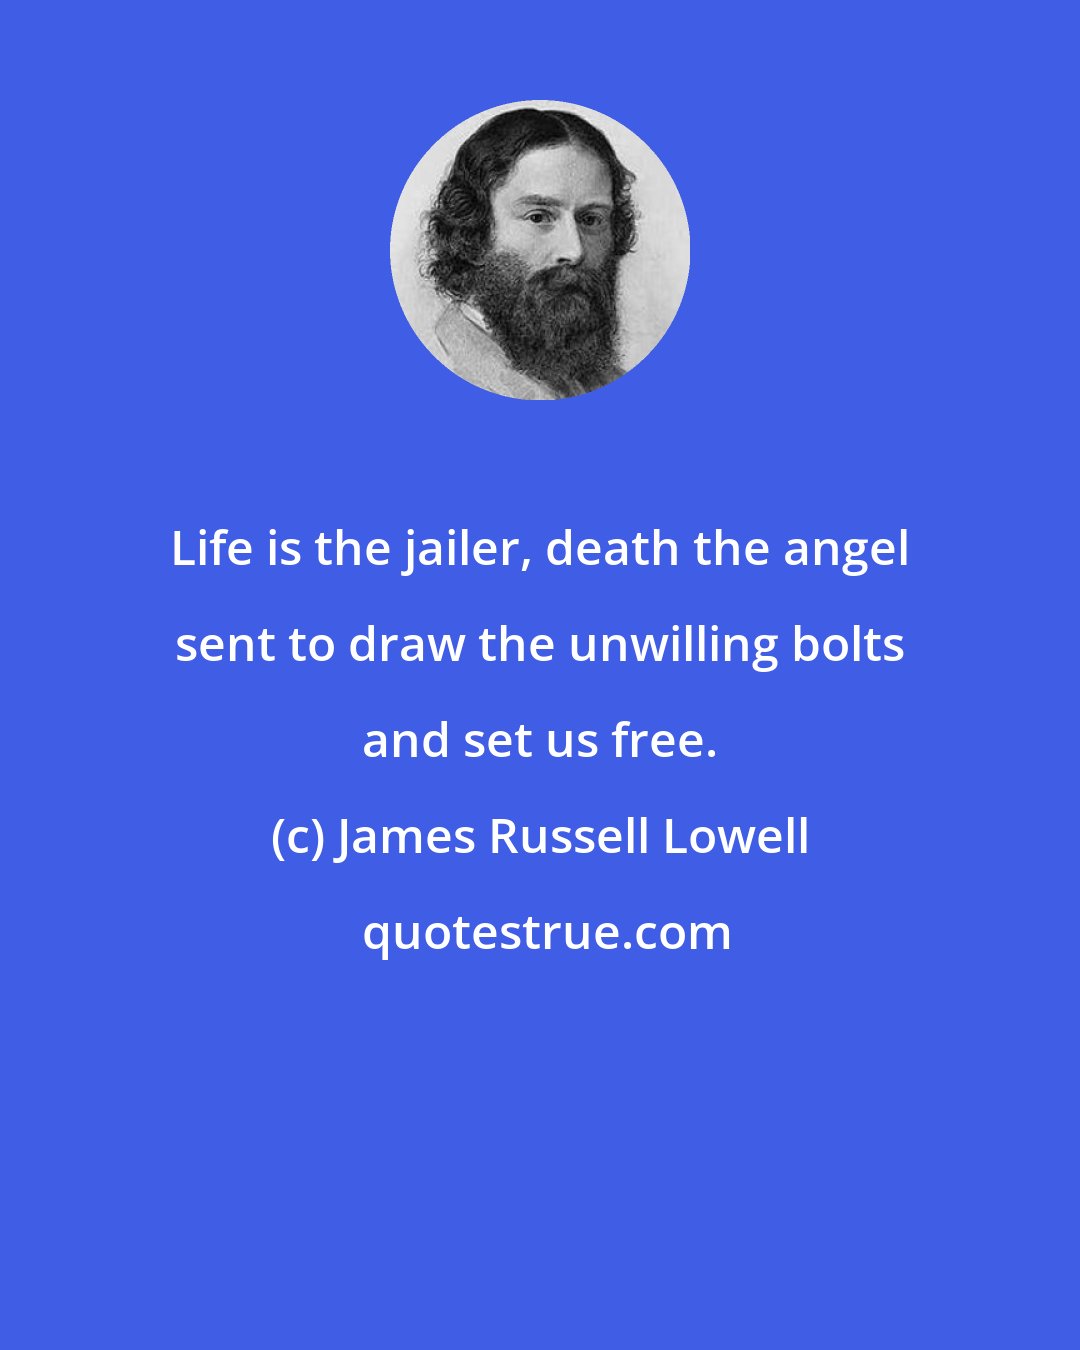 James Russell Lowell: Life is the jailer, death the angel sent to draw the unwilling bolts and set us free.